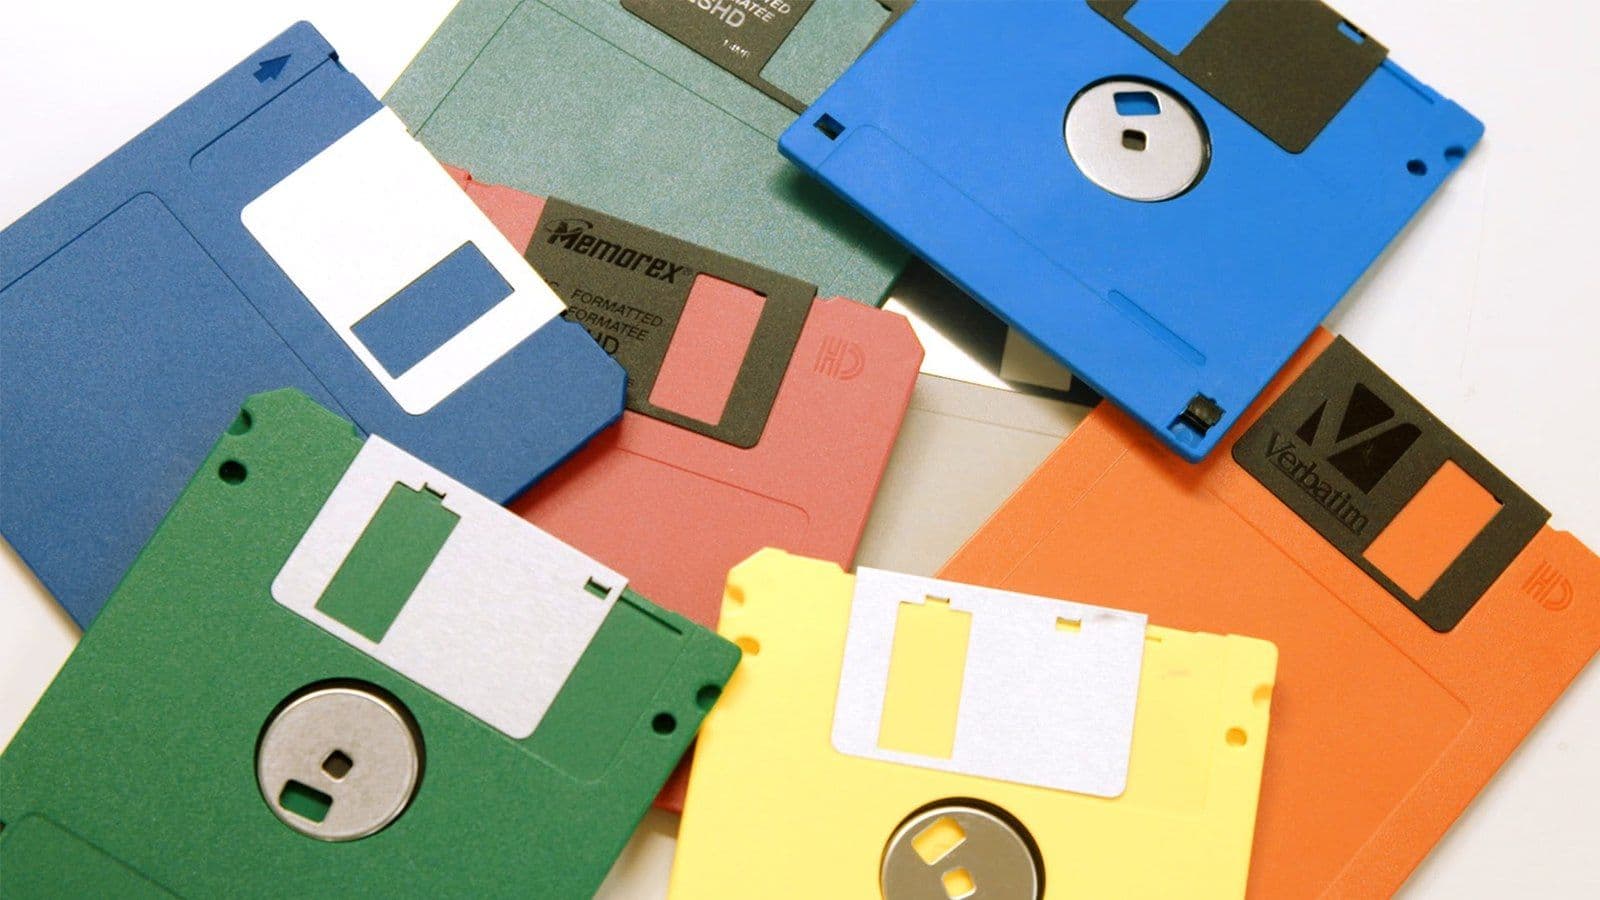 Japan Decided to Get Rid of Floppy Disks